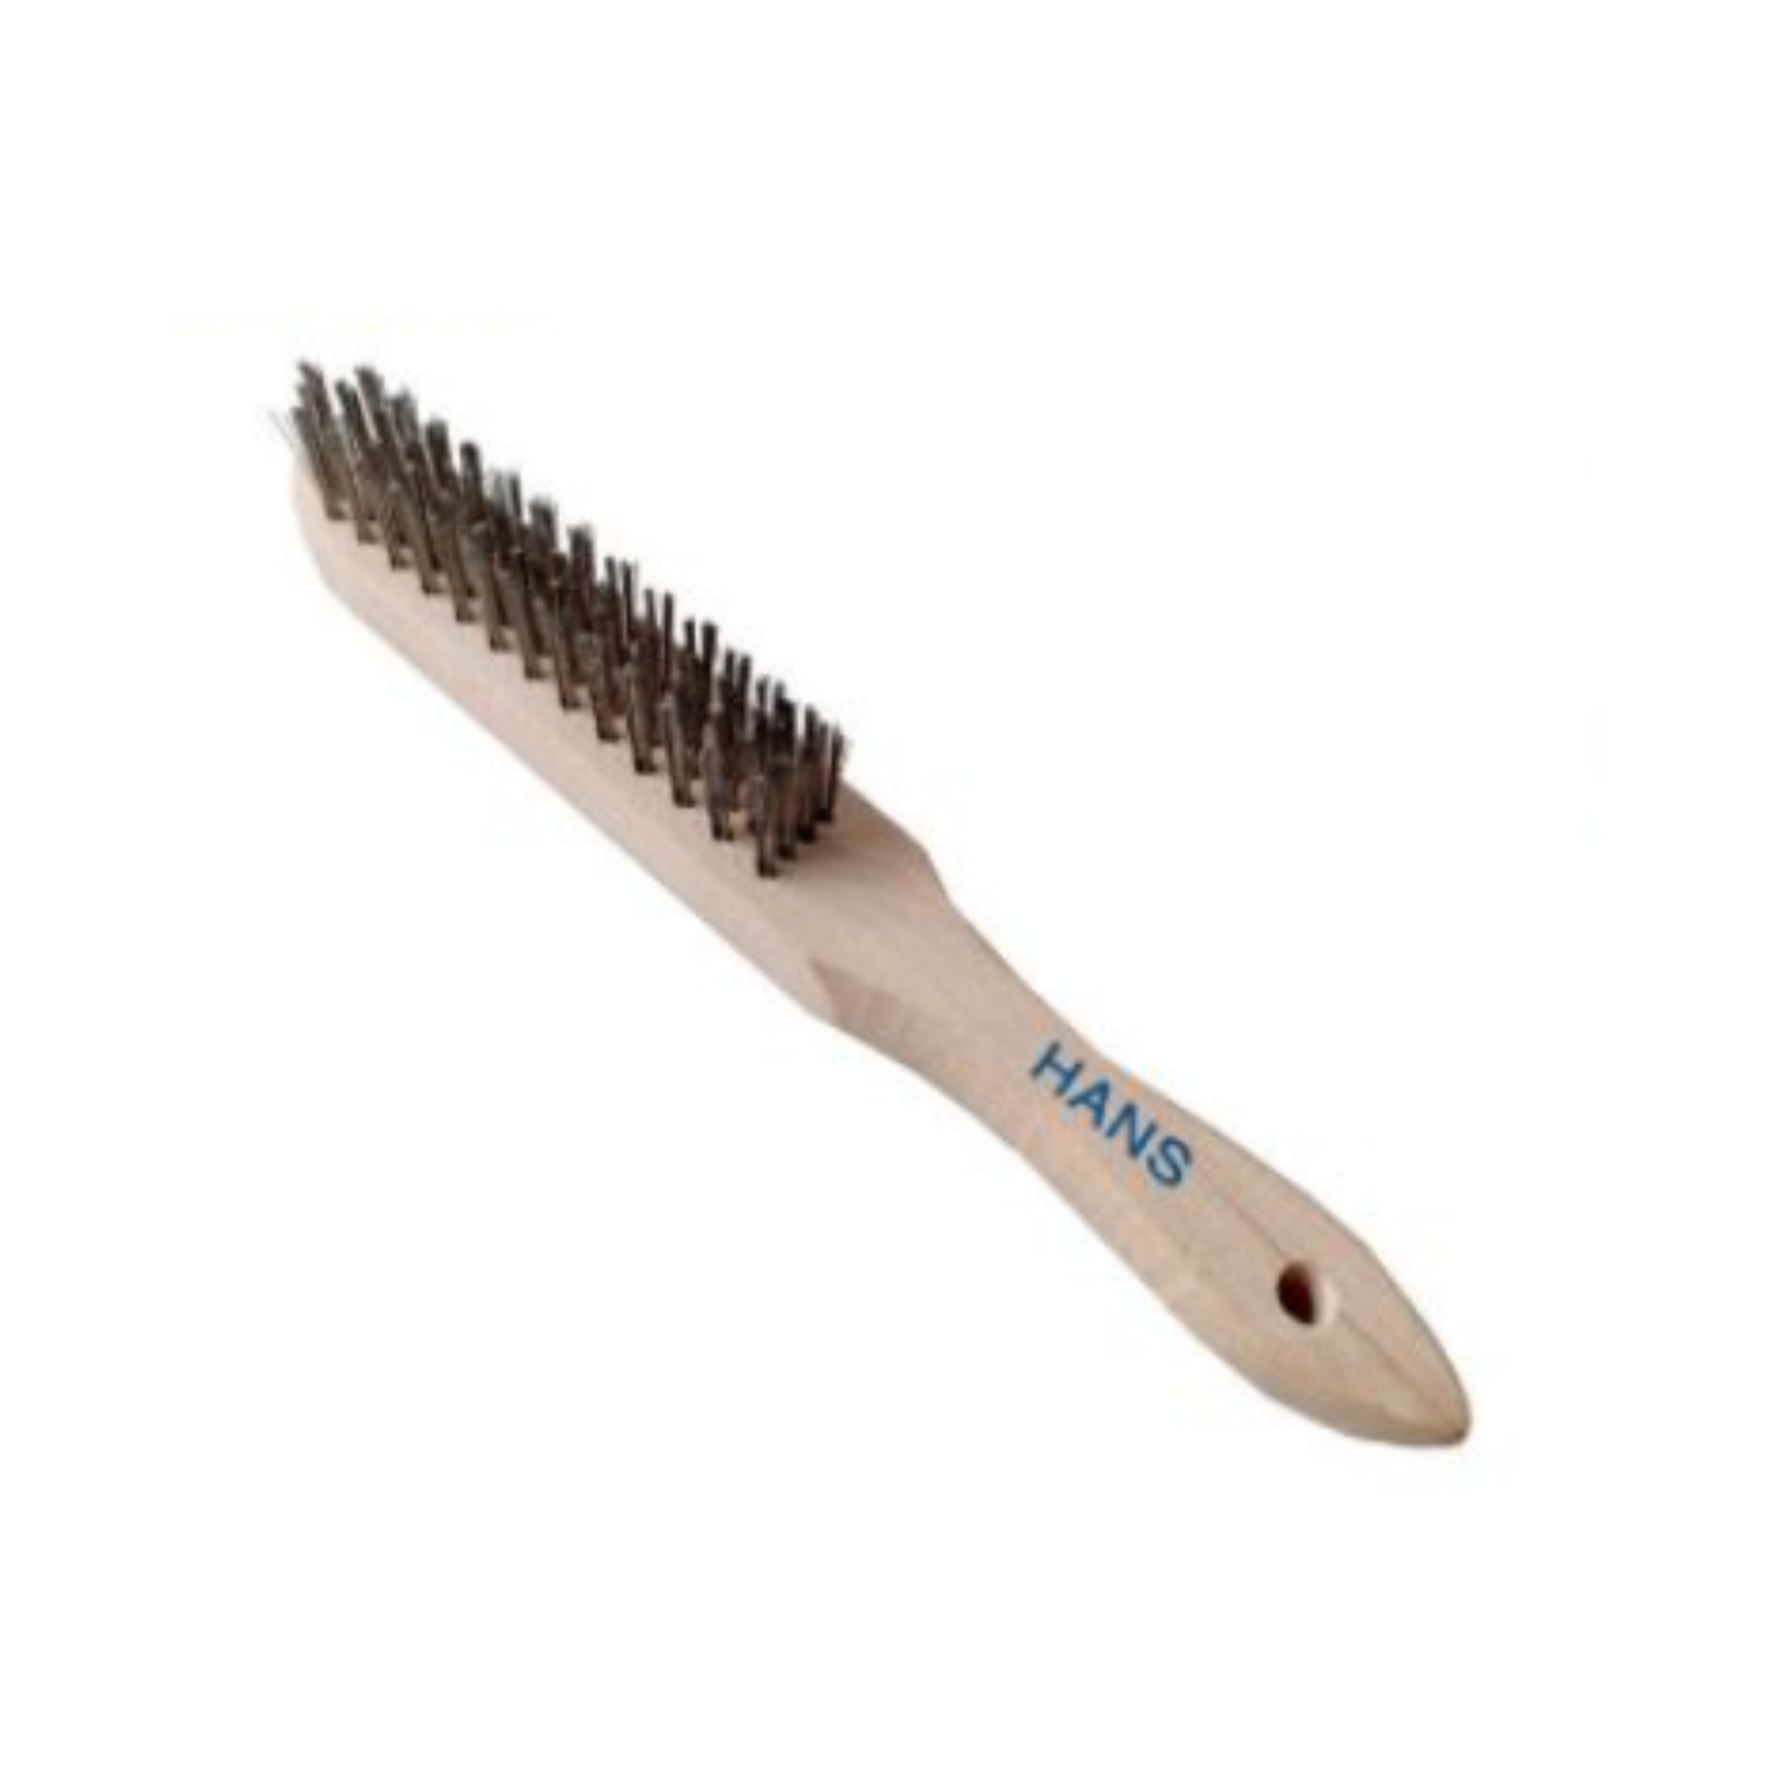 Hans STAINLESS STEEL WIRE Brush 5 ROW